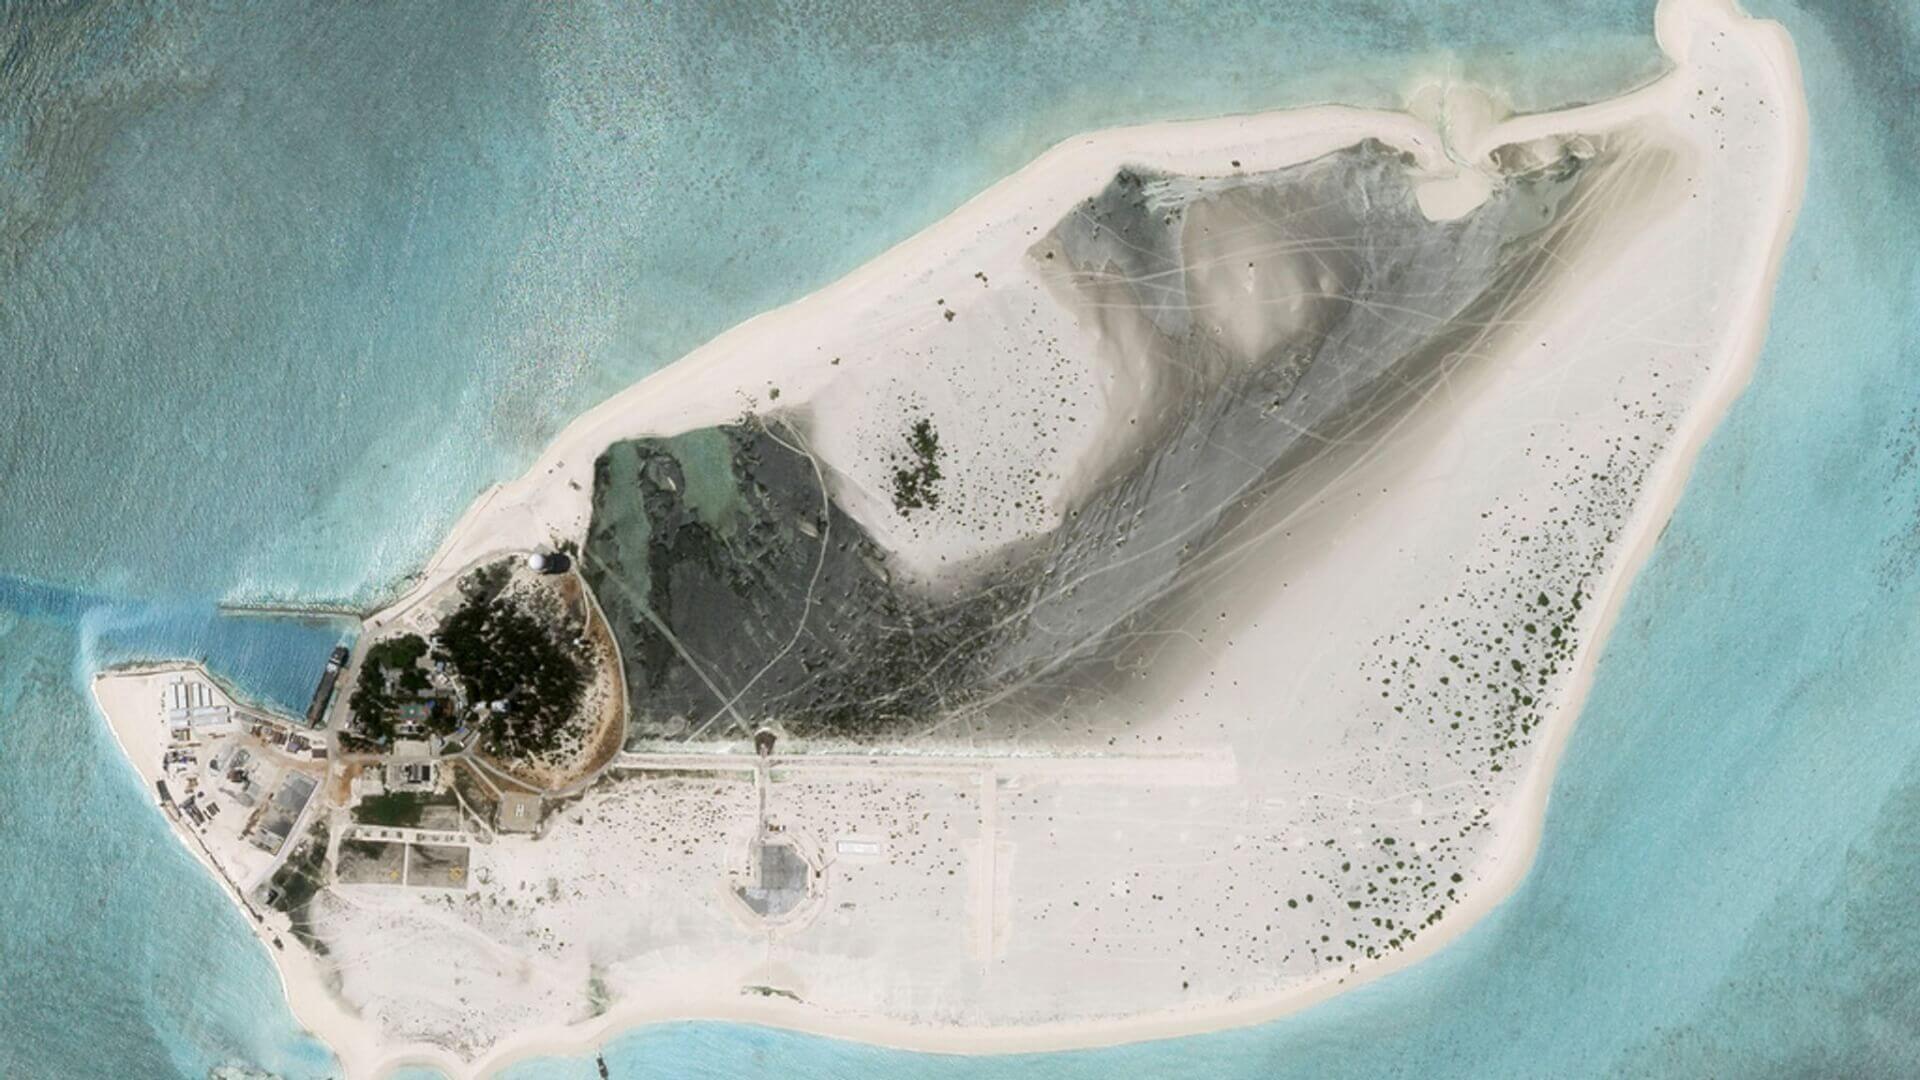 China's Airstrip Construction in Disputed South China Sea Island Raises Militarisation Concerns